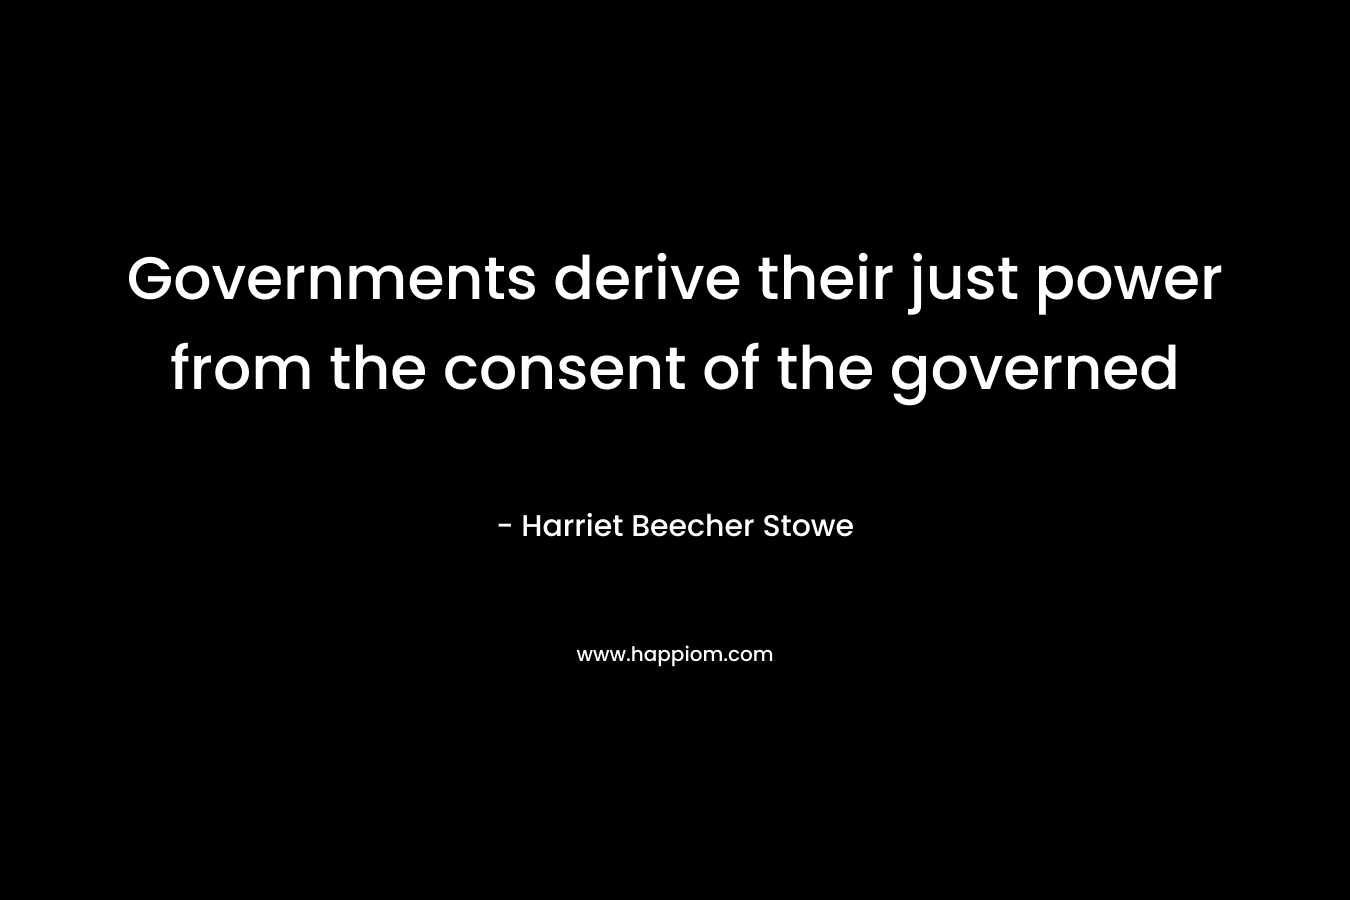 Governments derive their just power from the consent of the governed – Harriet Beecher Stowe